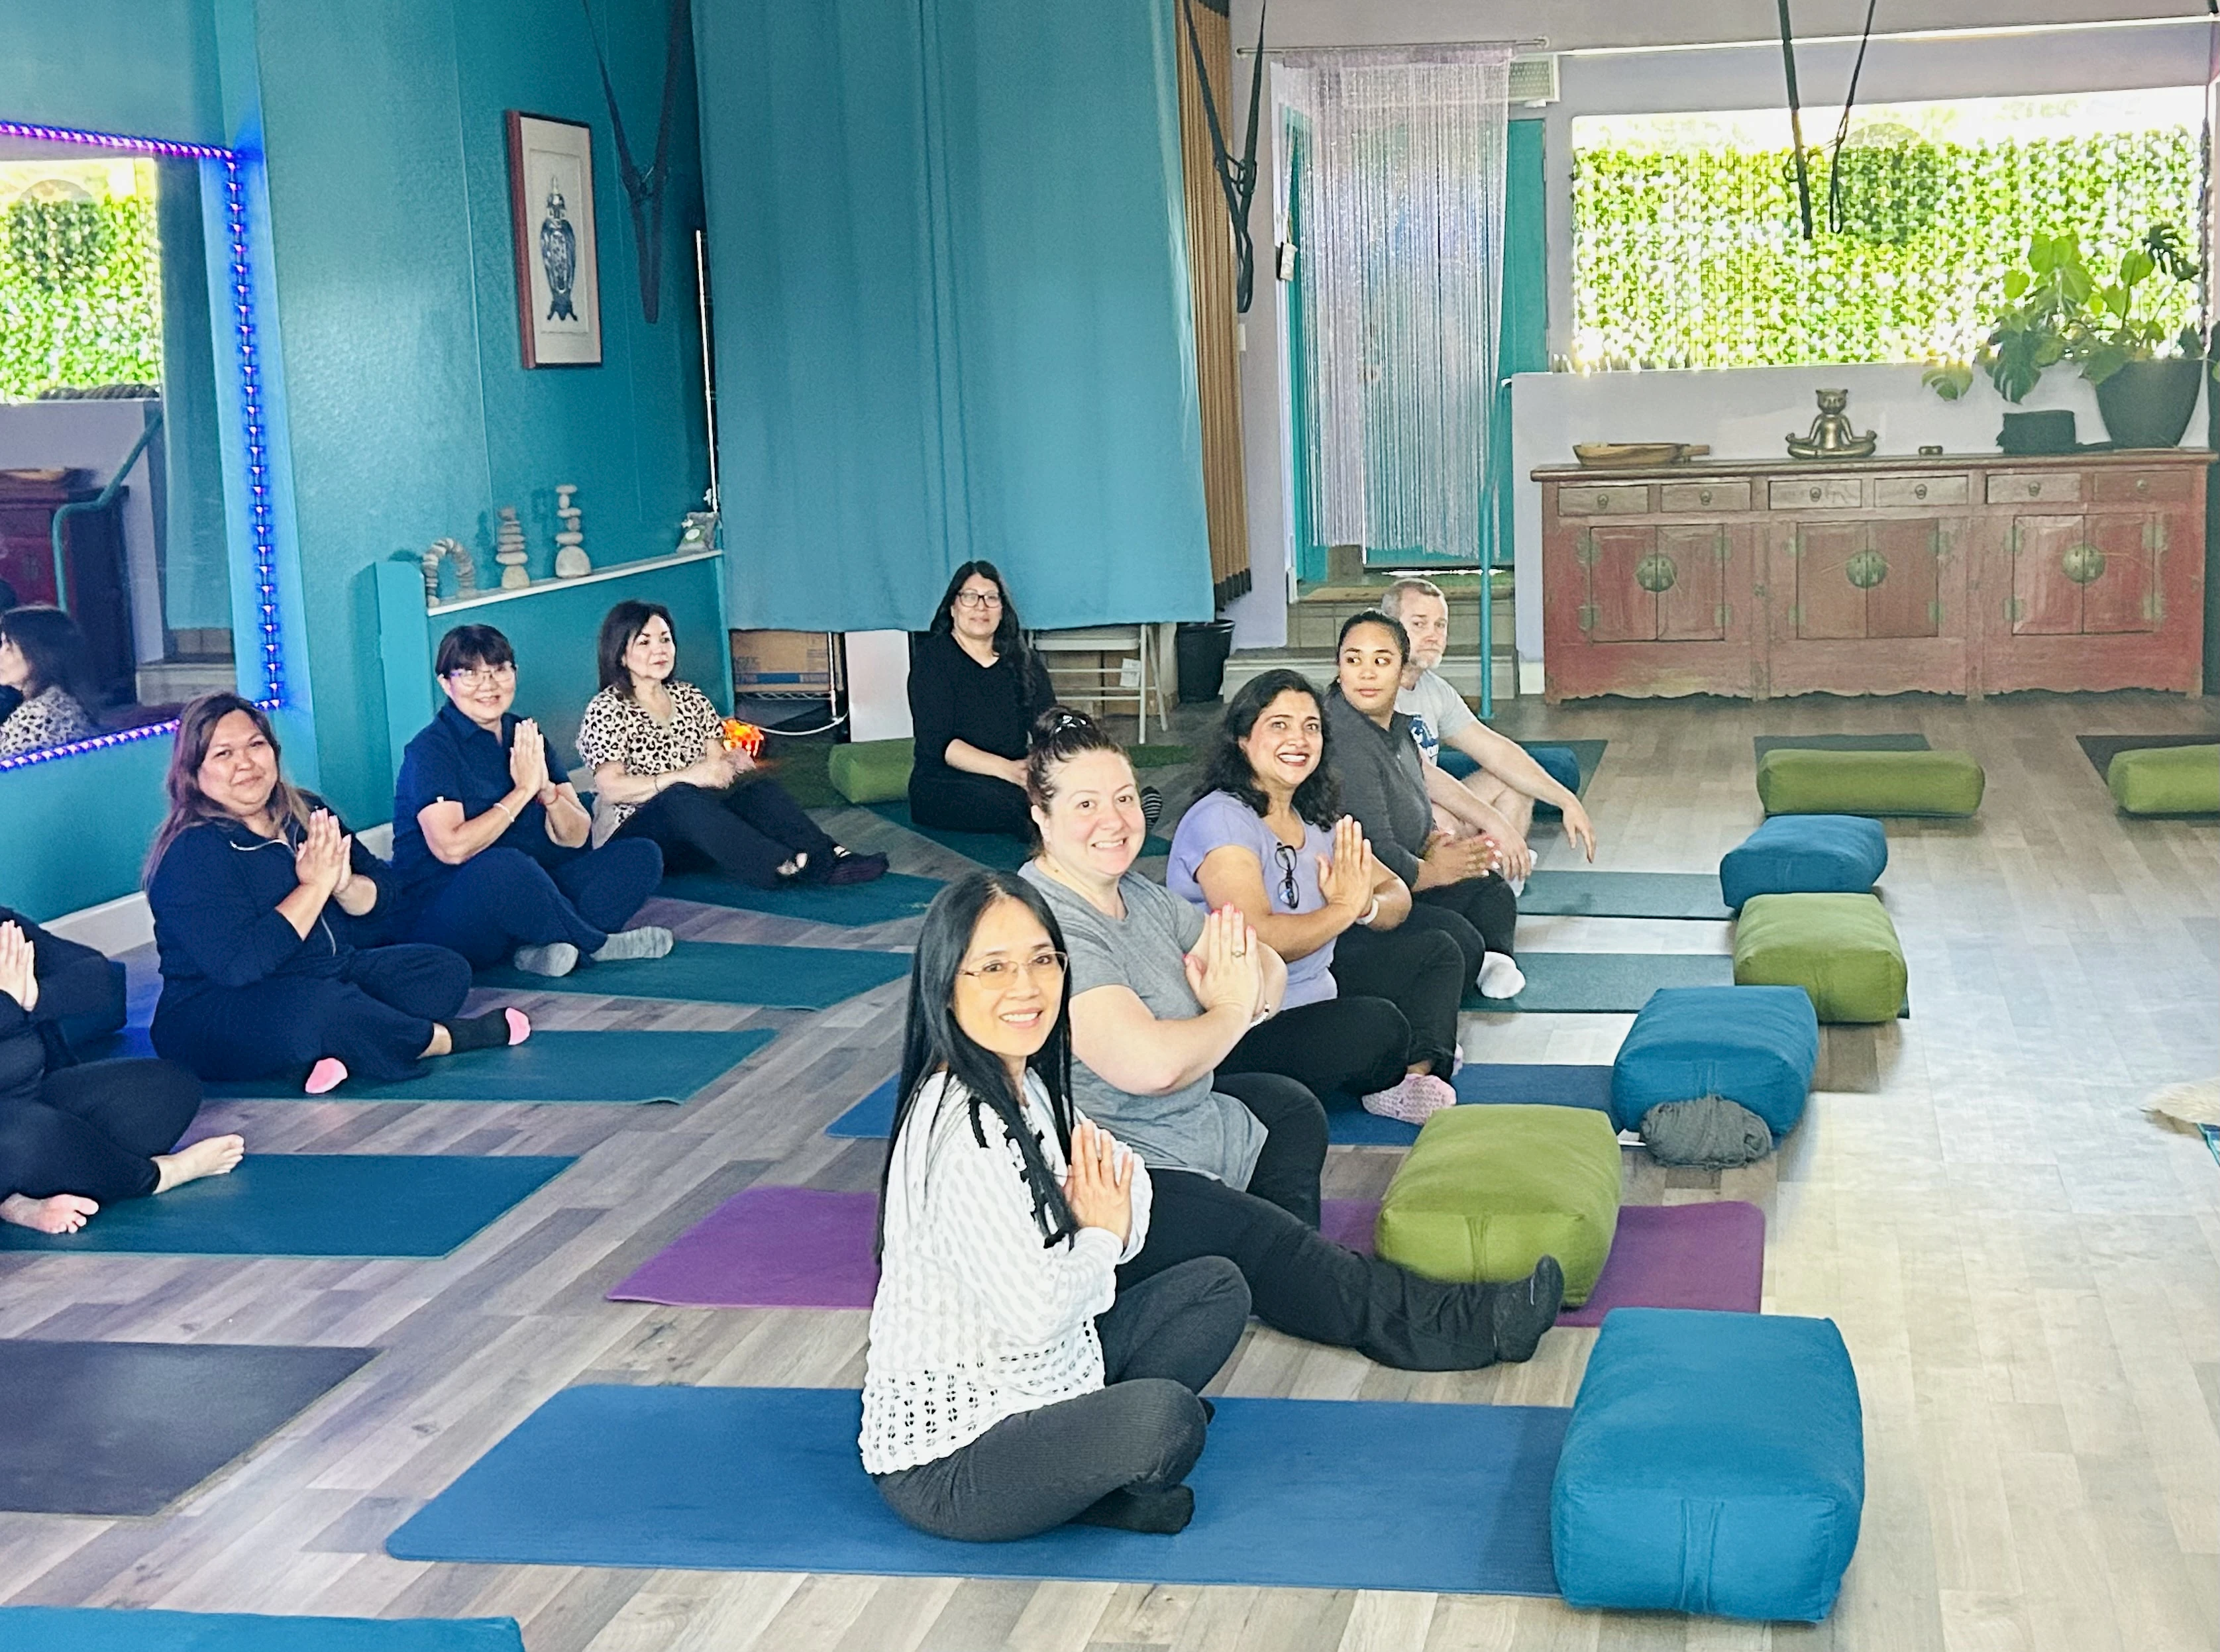 Another successful Sound Bath yoga session at Harmony Family Yoga! This time Mission Home Health and Hospice joined us for a relaxing evening finding our zen!